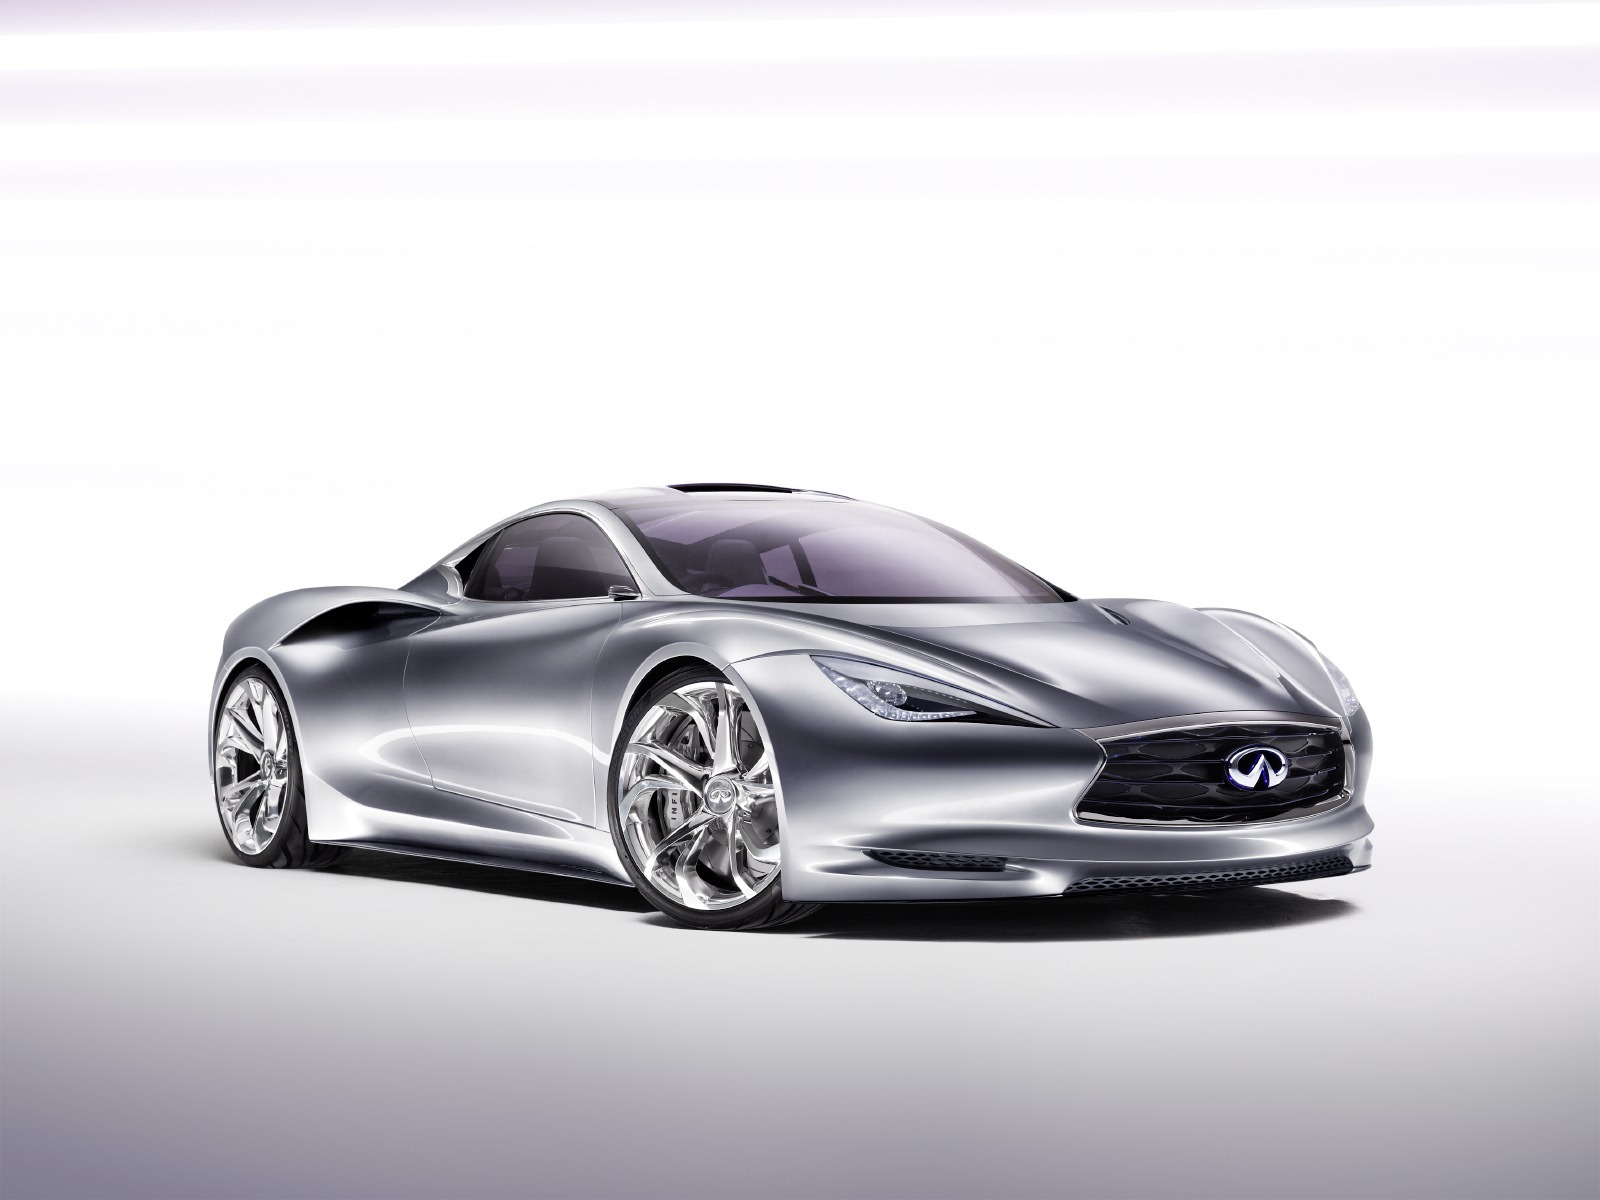 Amazing Infiniti EMERG-E Concept Pictures & Backgrounds